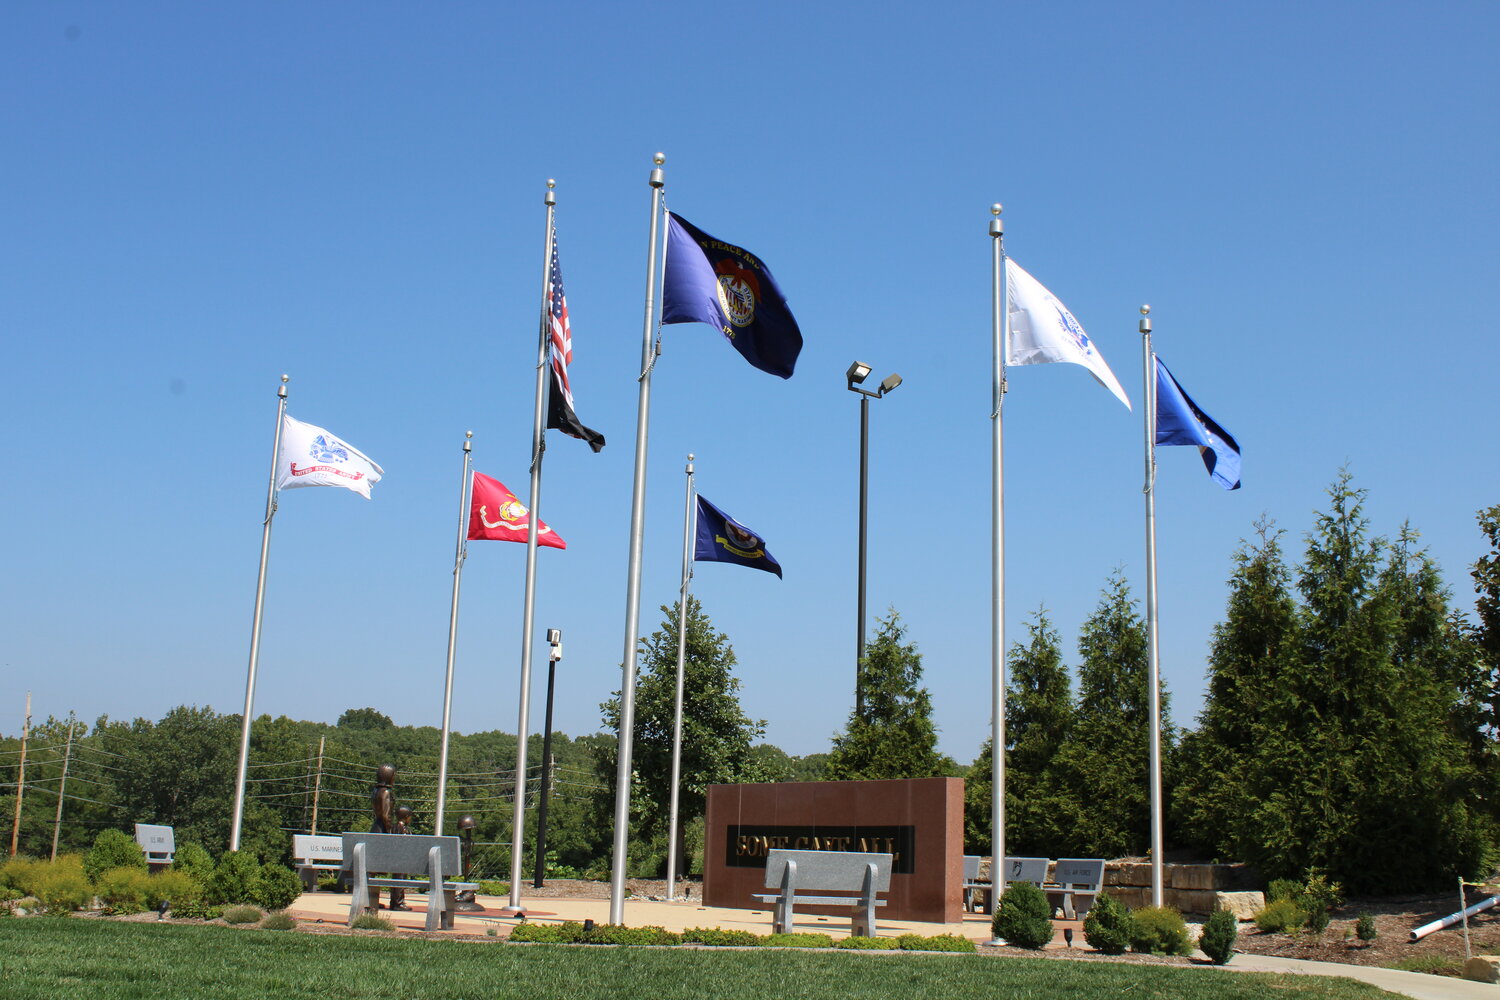 The Tribute to Veterans Memorial in Warrenton will be the site of two ceremonies this week to honor Sept. 11 and POW/MIA Day.